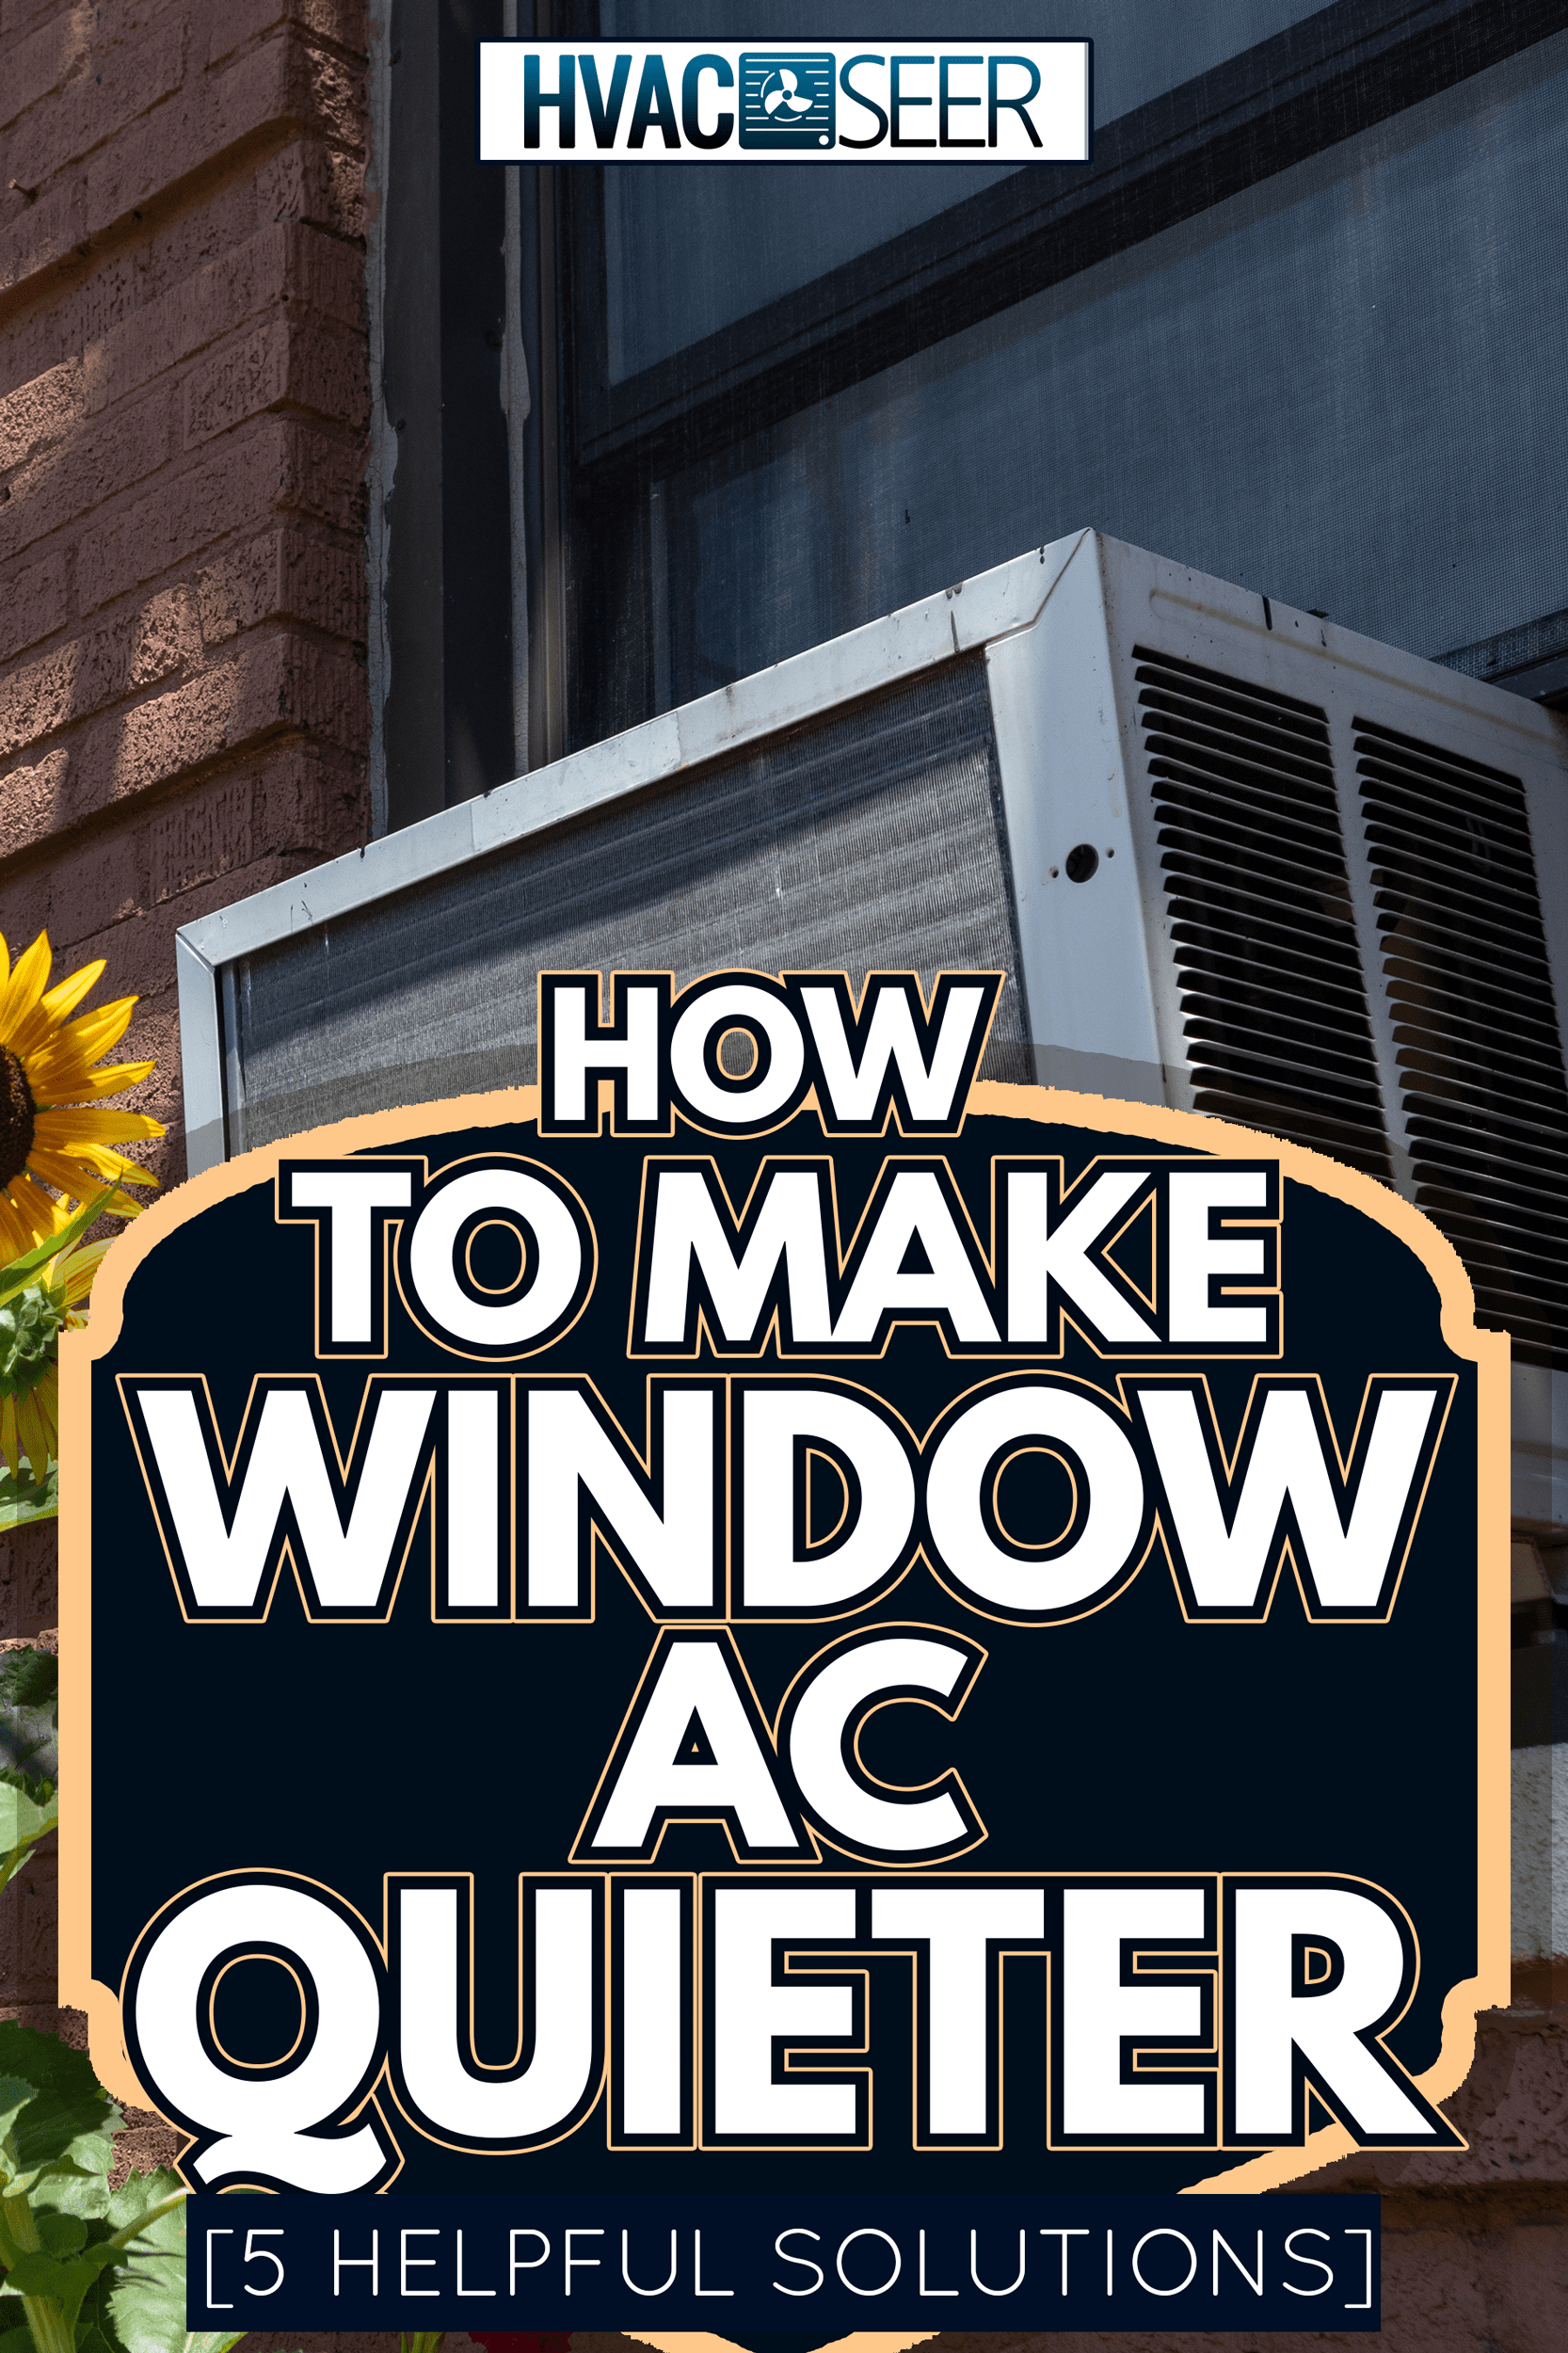 A window air conditioning unit outside an old brick apartment building above a garden with yellow sunflowers during summer in Astoria Queens New York - How To Make Window AC Quieter [5 Helpful Solutions]